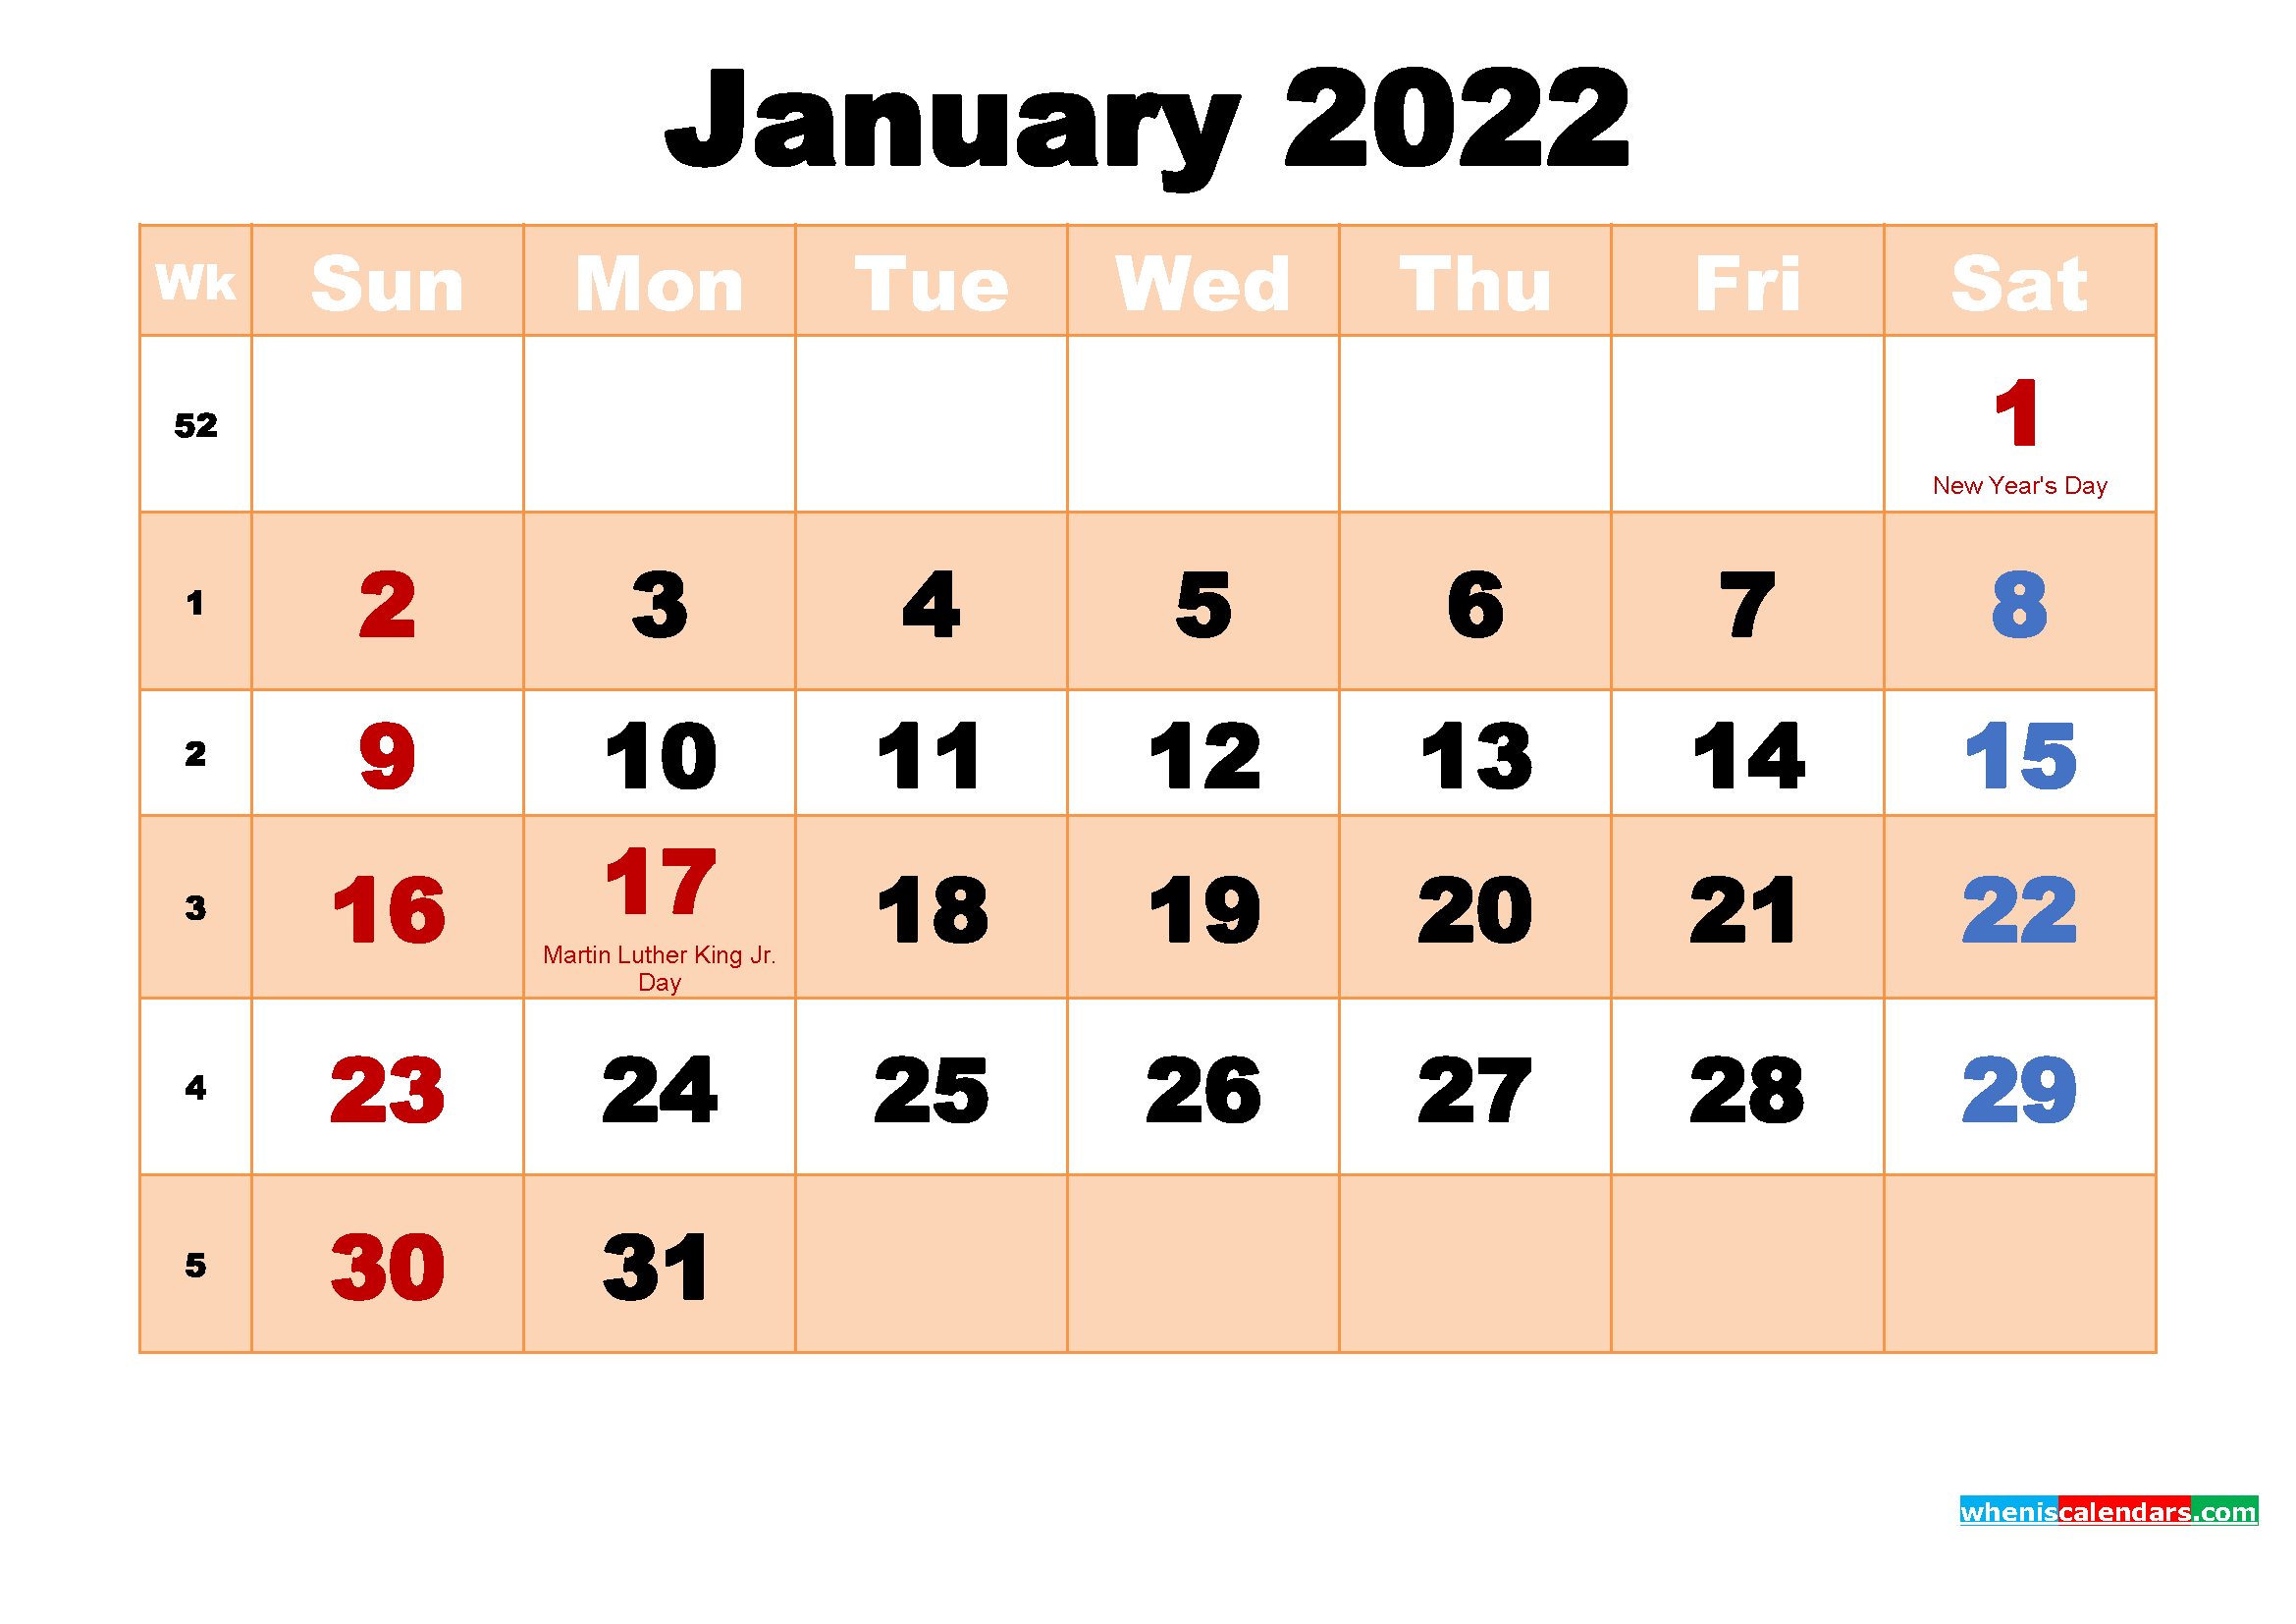 January 2022 Calendar With Holidays Wallpapers